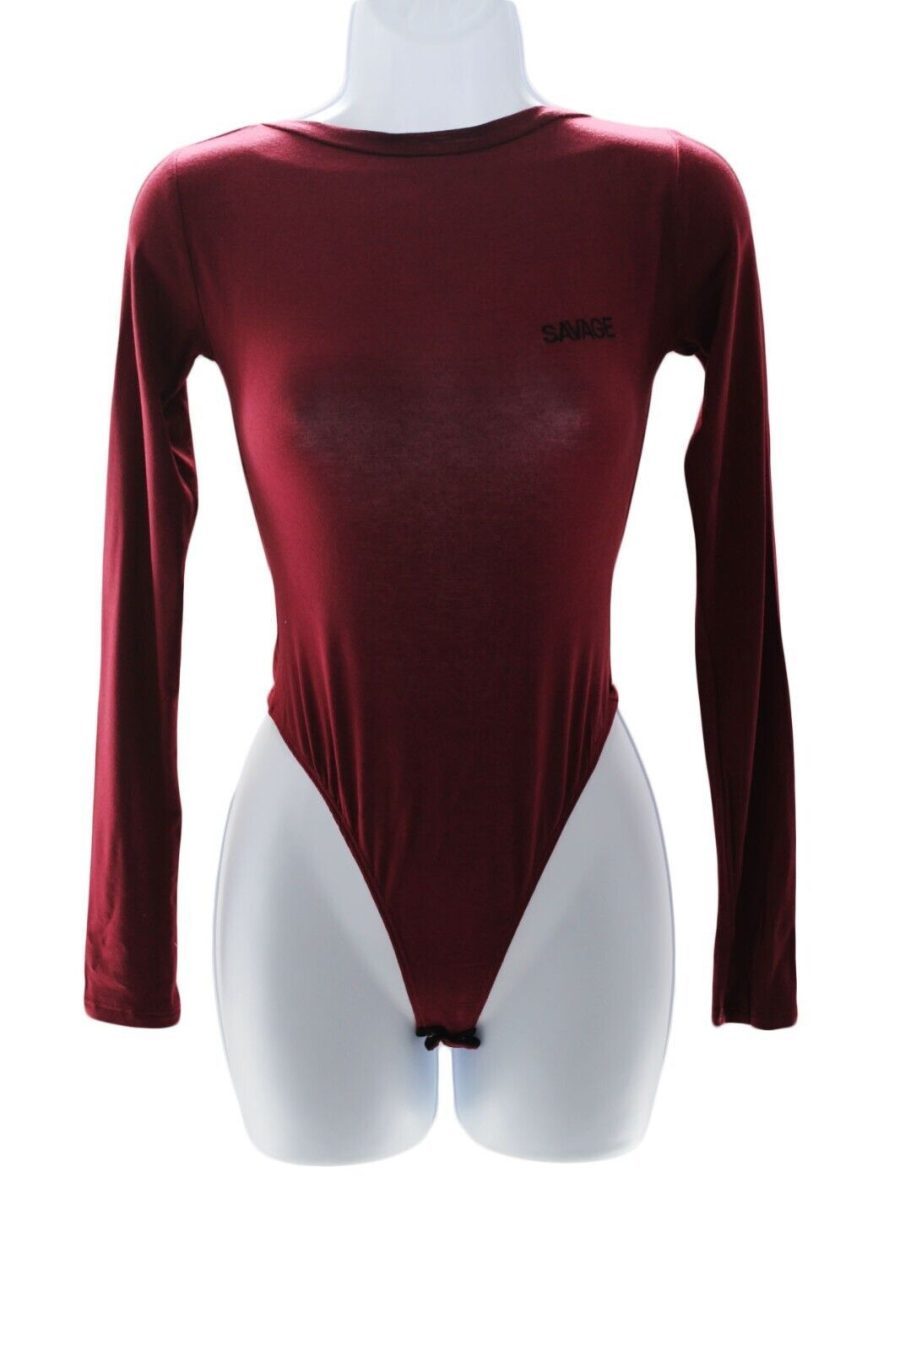 Wet Seal Bodysuit Junior Savage Open Back Burgundy Thong Size Small